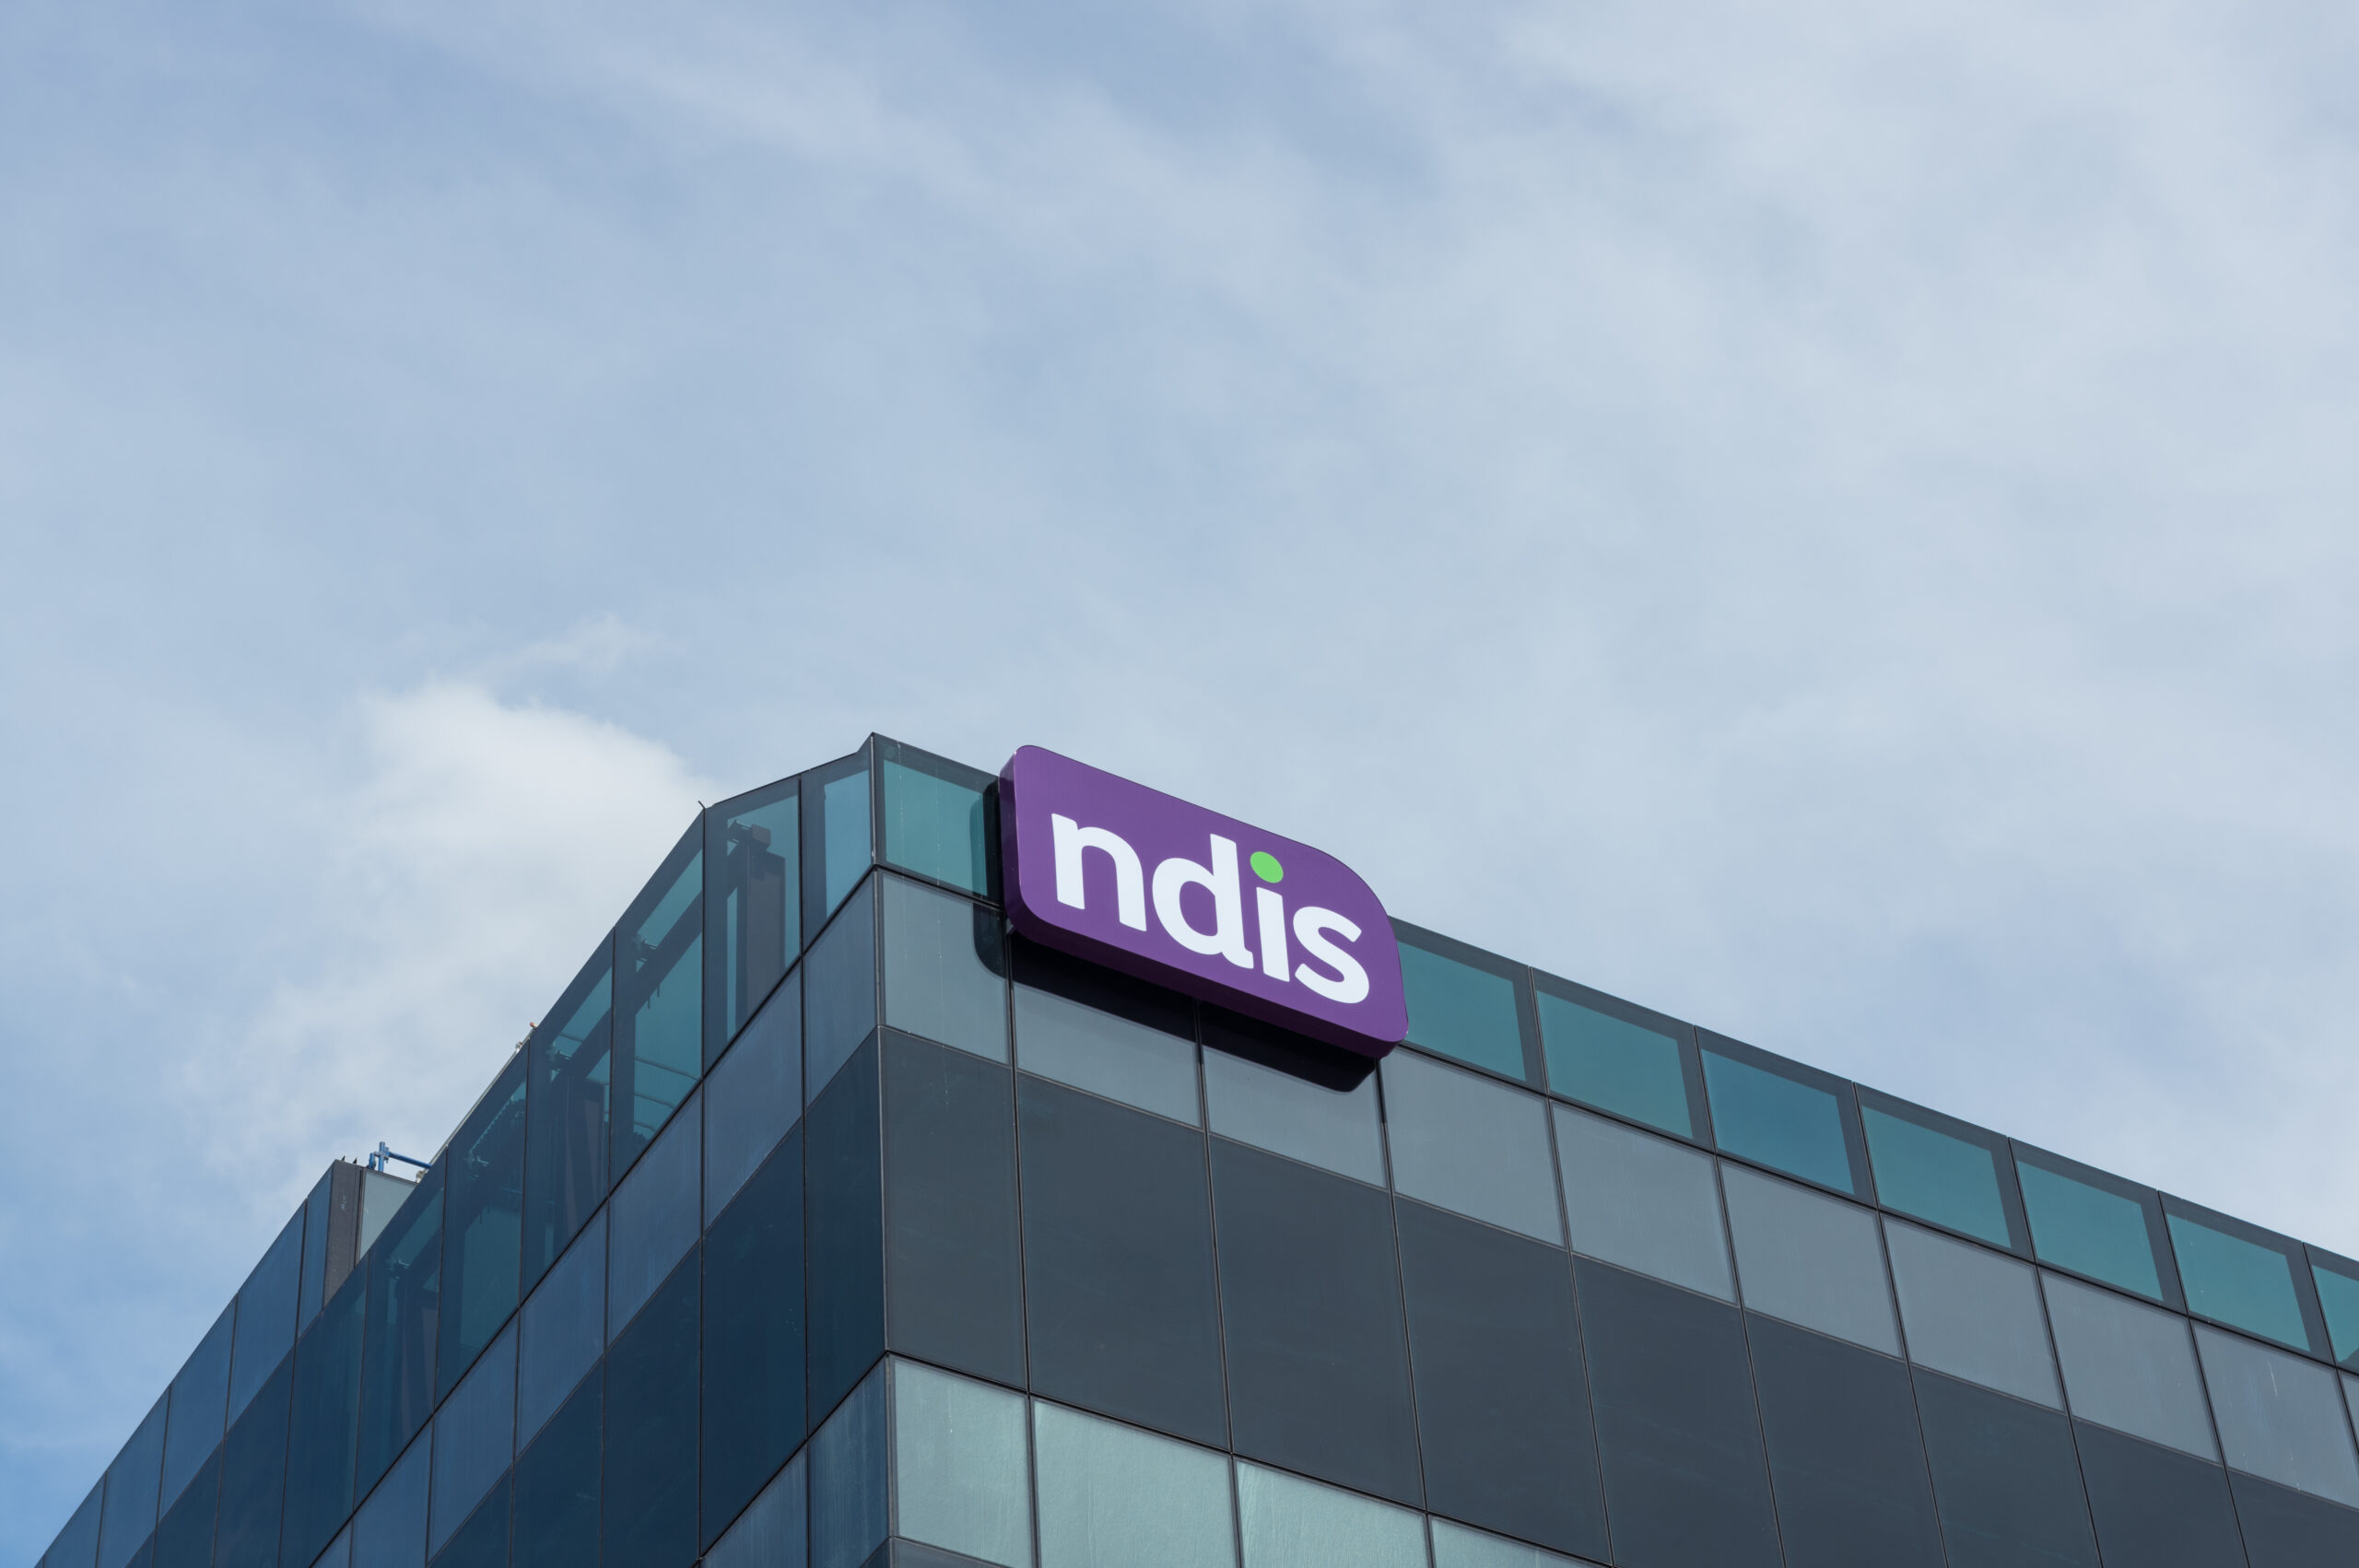 The NDIS logo on a large building